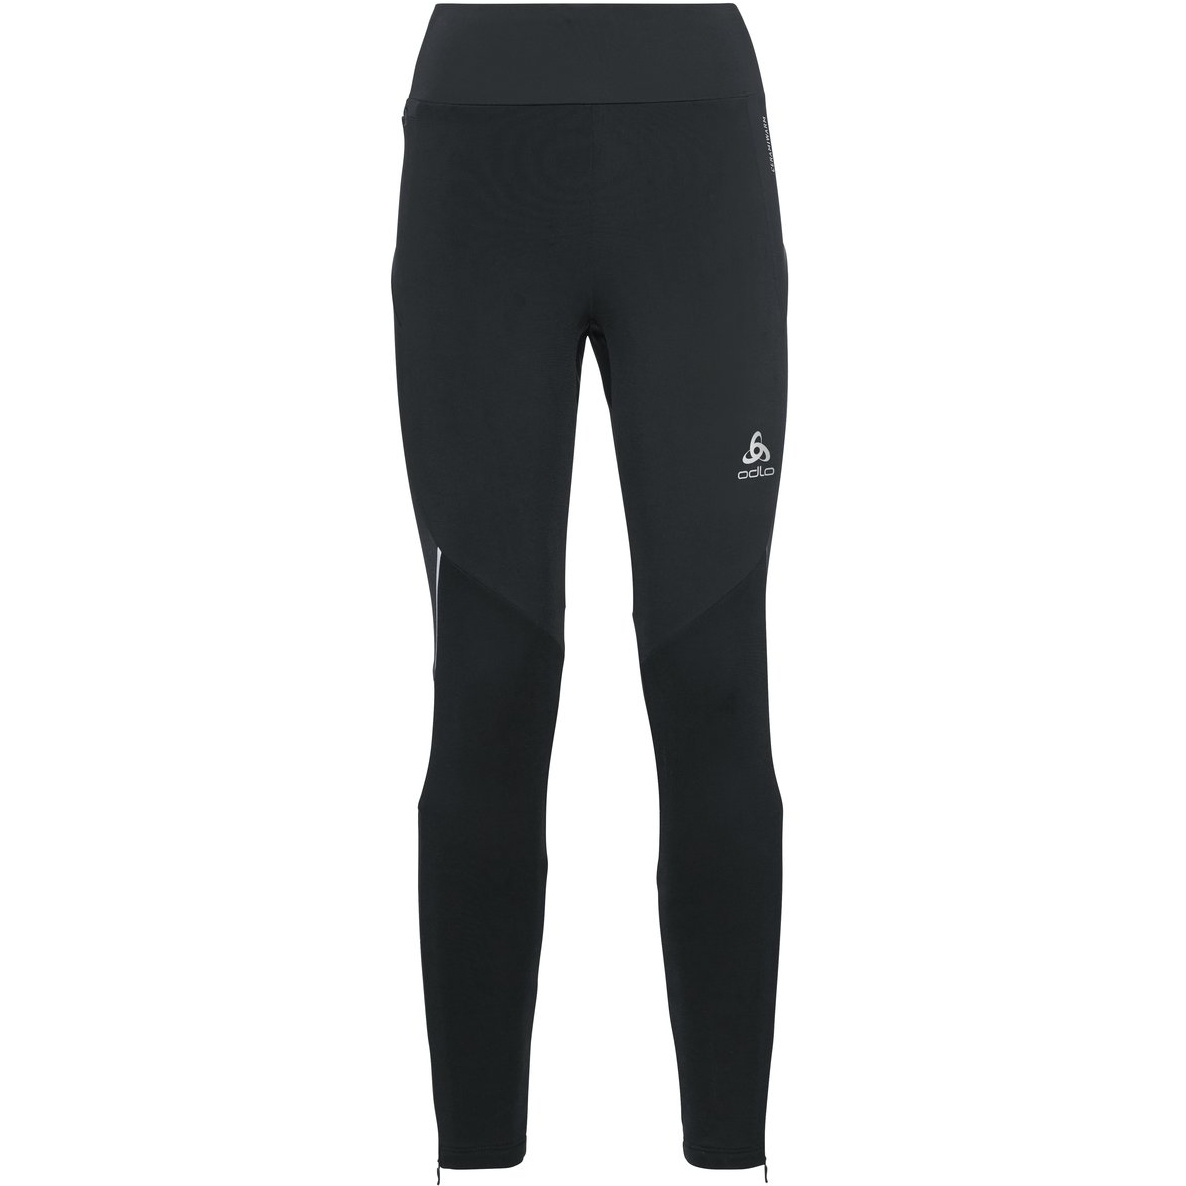 Picture of Odlo Ceramiwarm Cross-Country Tights Women - black